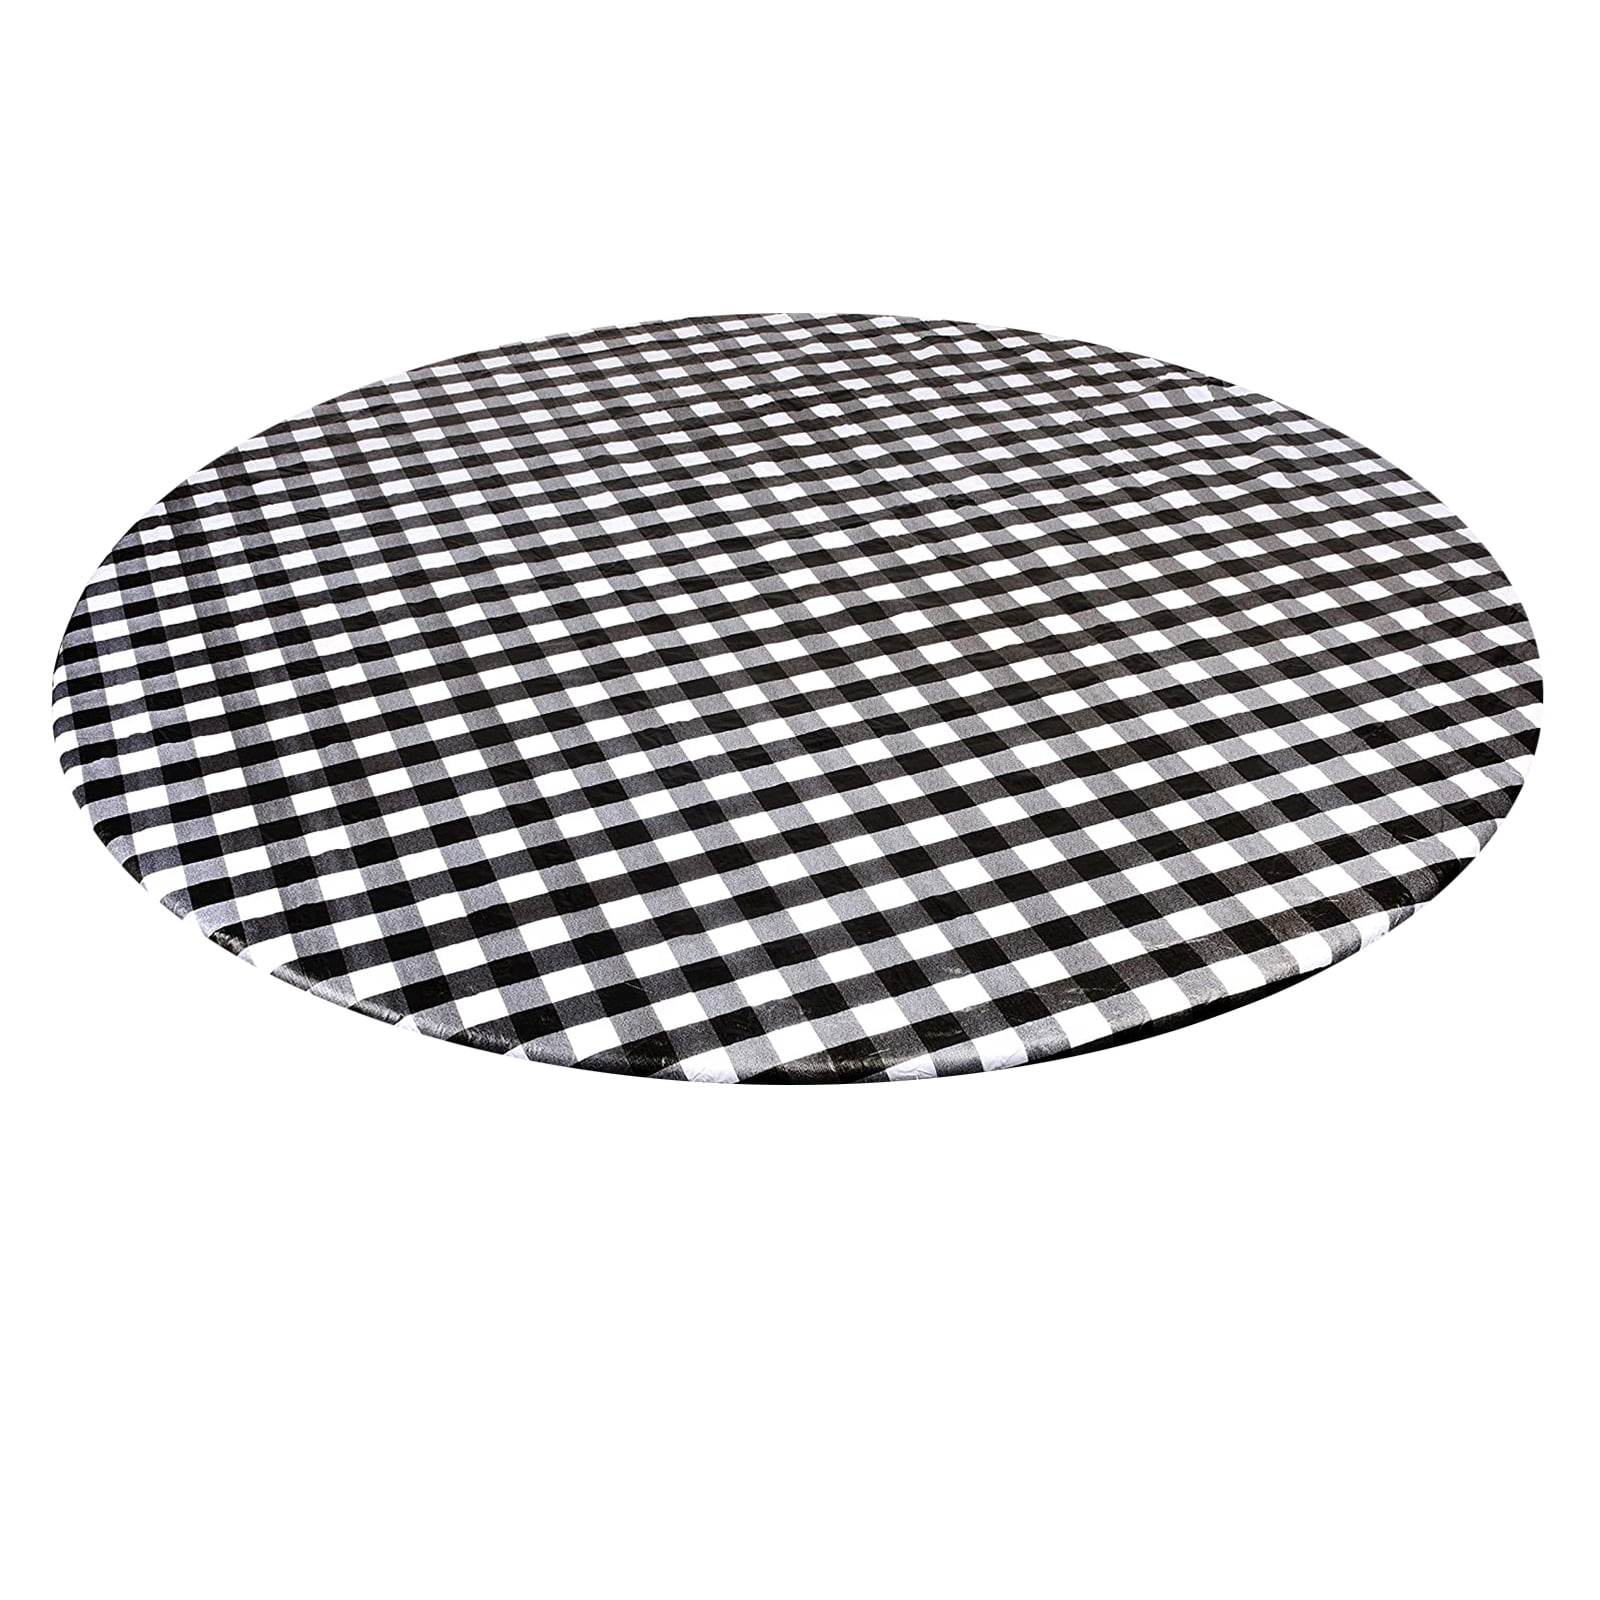 Tablecloth Oilcloth Wax Tablecloth Linen Plain Monochrome Round-Square-Oval 